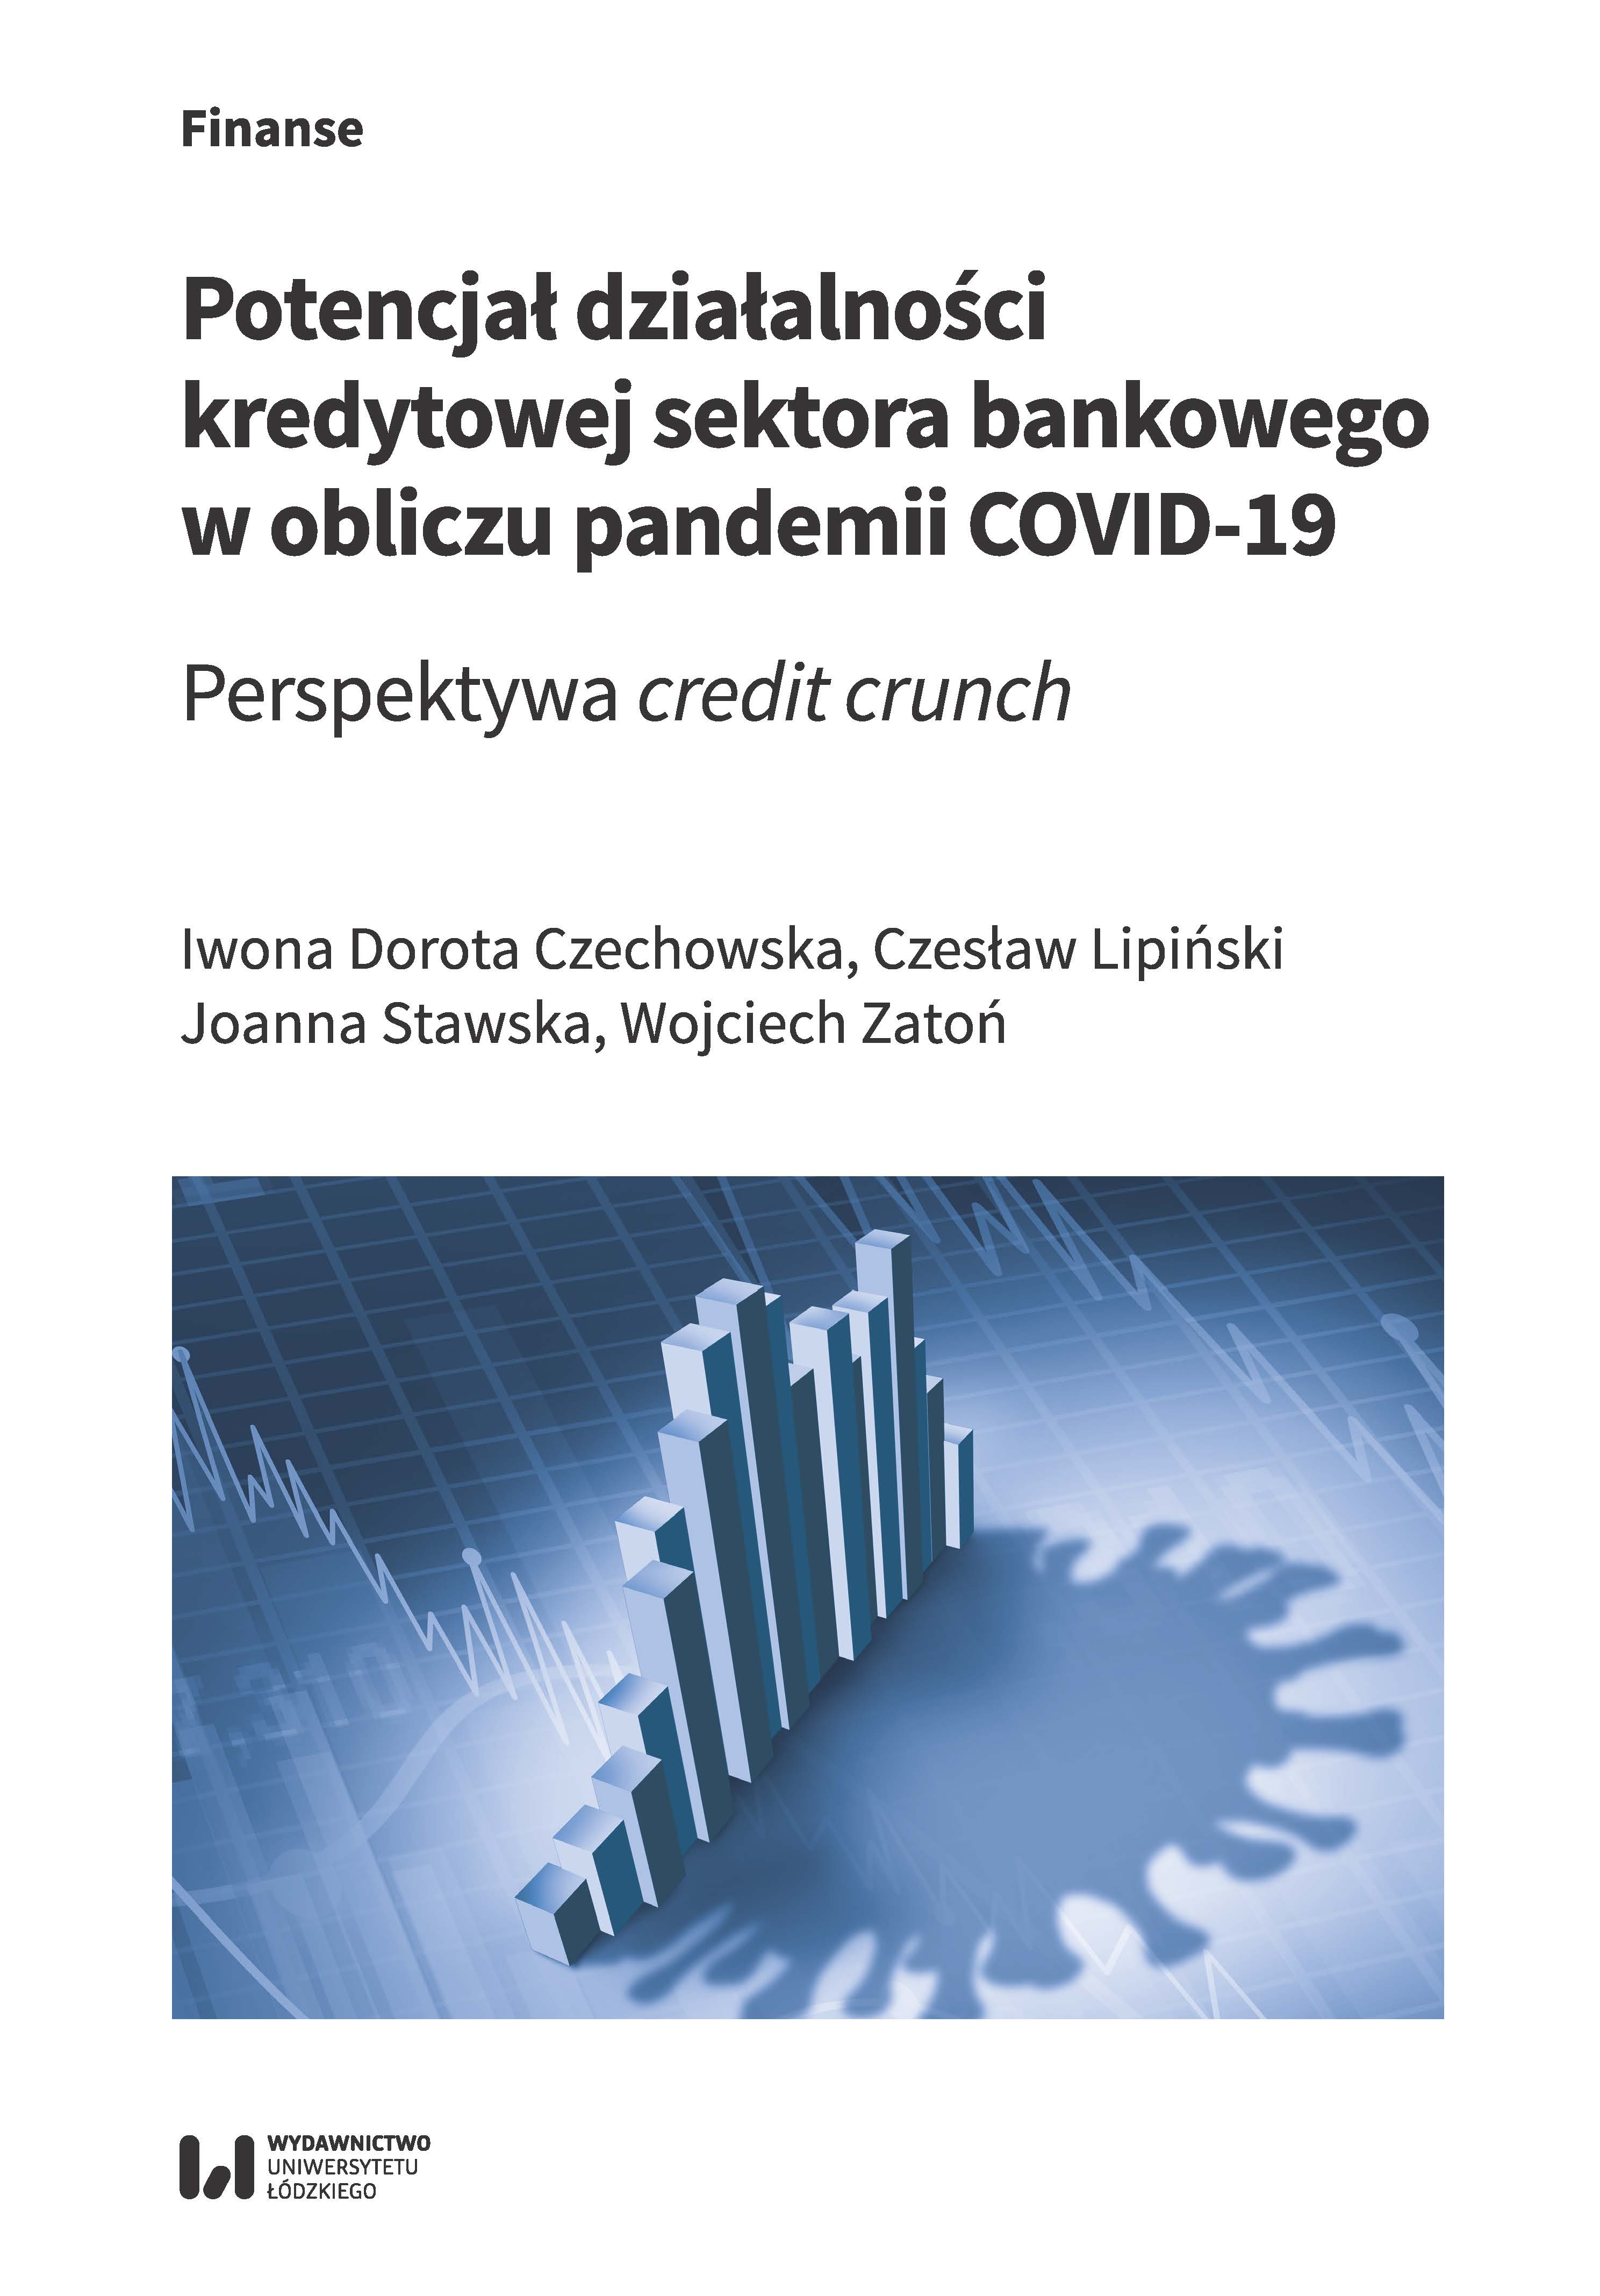 The Potential of the Banking Sector Lending in the Face of the COVID-19 Pandemic. Credit-crunch Perspective Cover Image